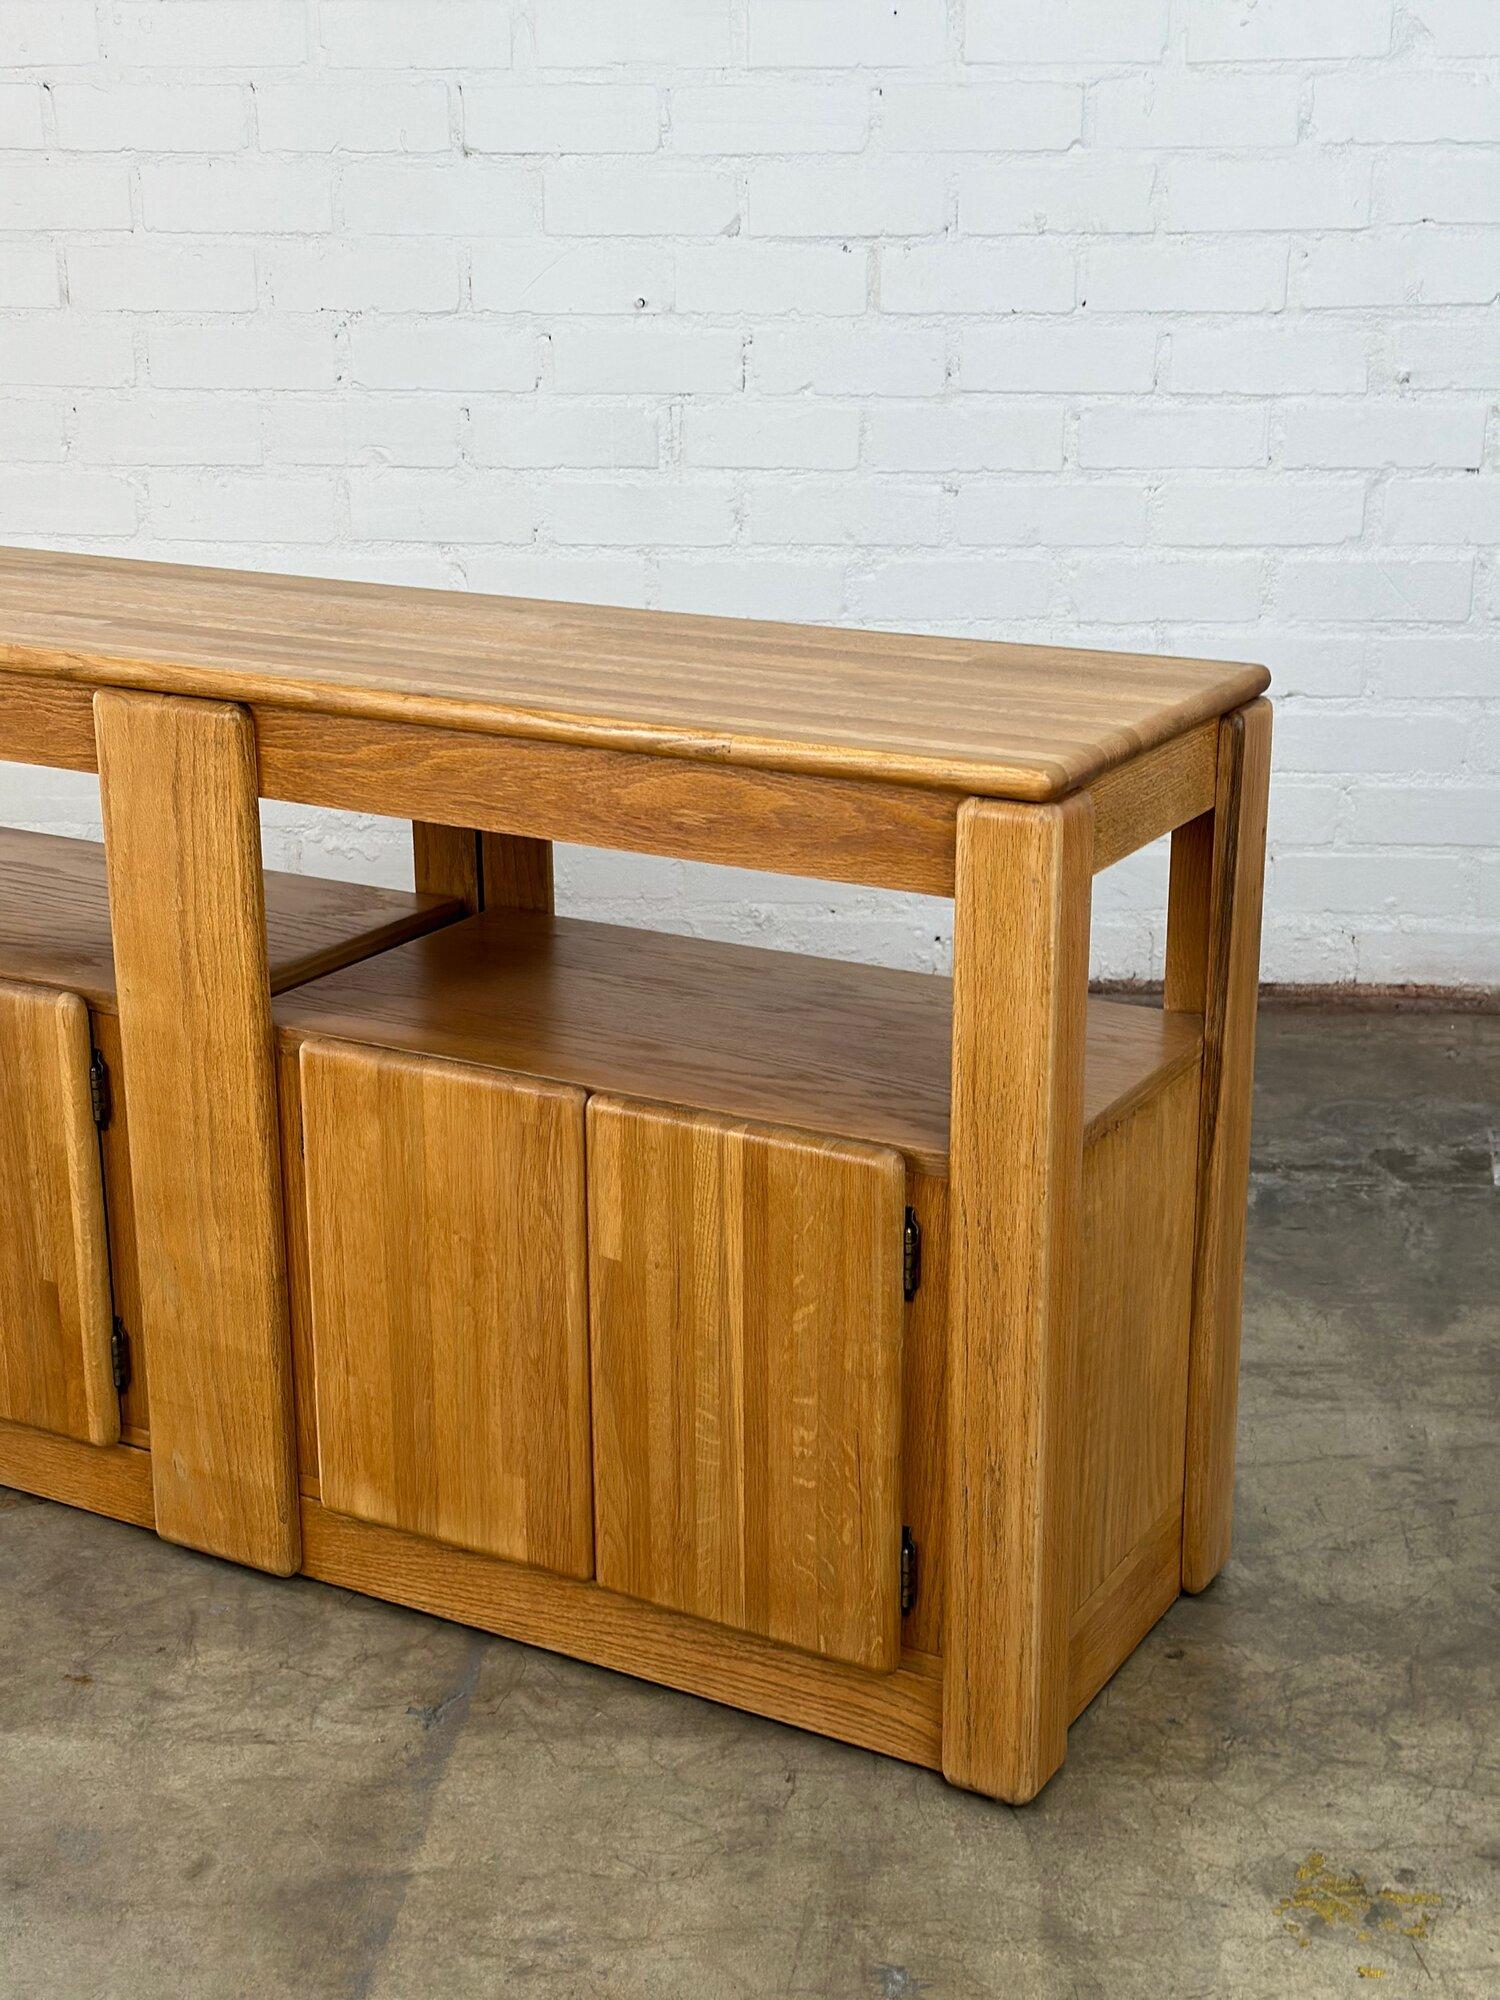 W60 D17 H31

Restored media credenza in structurally sound fully functional condition. Item is made with a majority of solid oak very minimal areas have veneer. Item is finished on all side and shows very well.